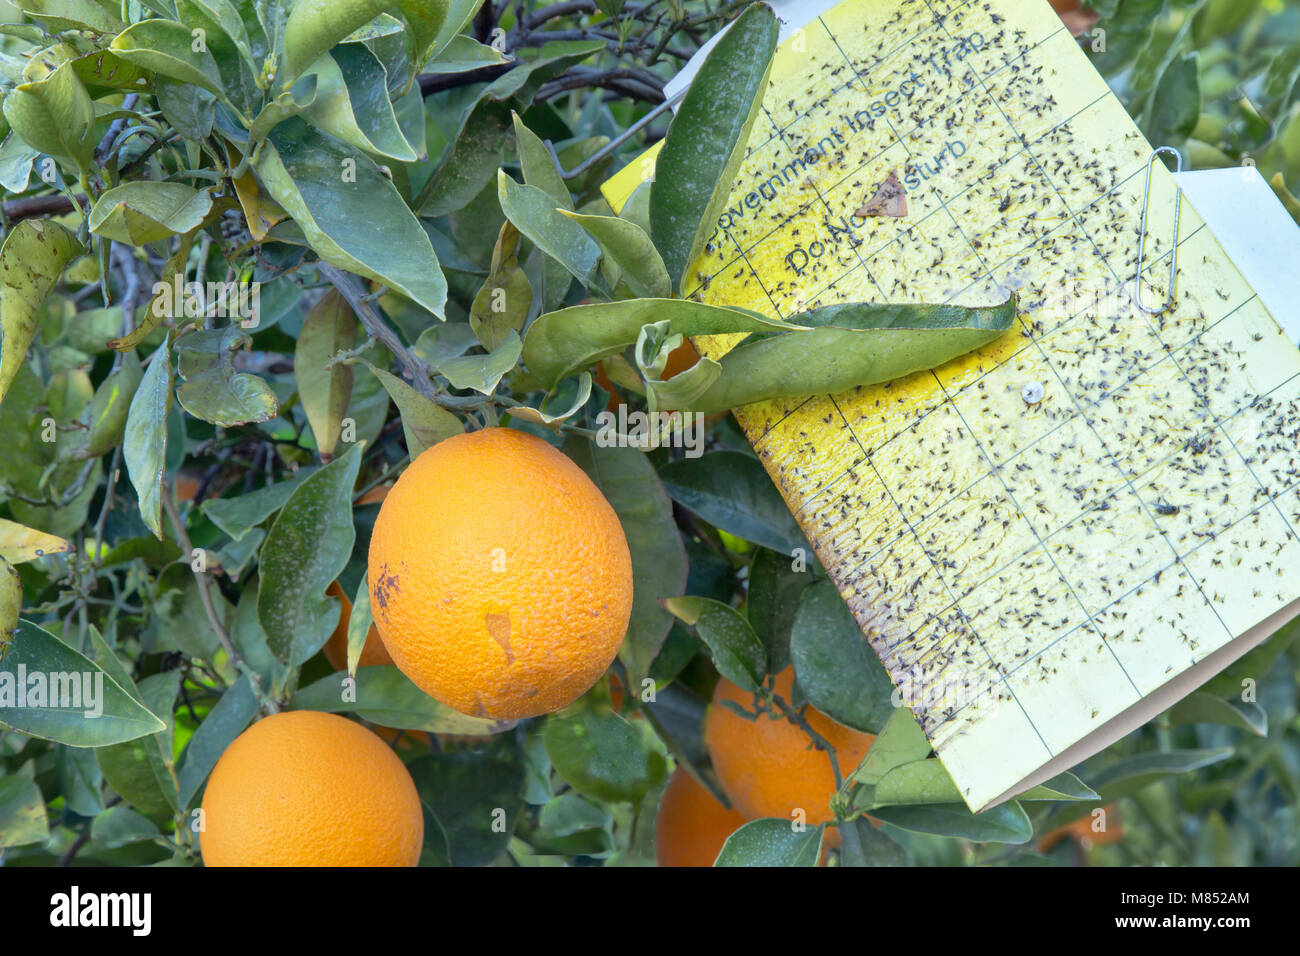 Treated Maturing Cutter nucellar Valencia Oranges on branch 'Citrus sinensis',  Government insect trap  'do not disturb'. Stock Photo